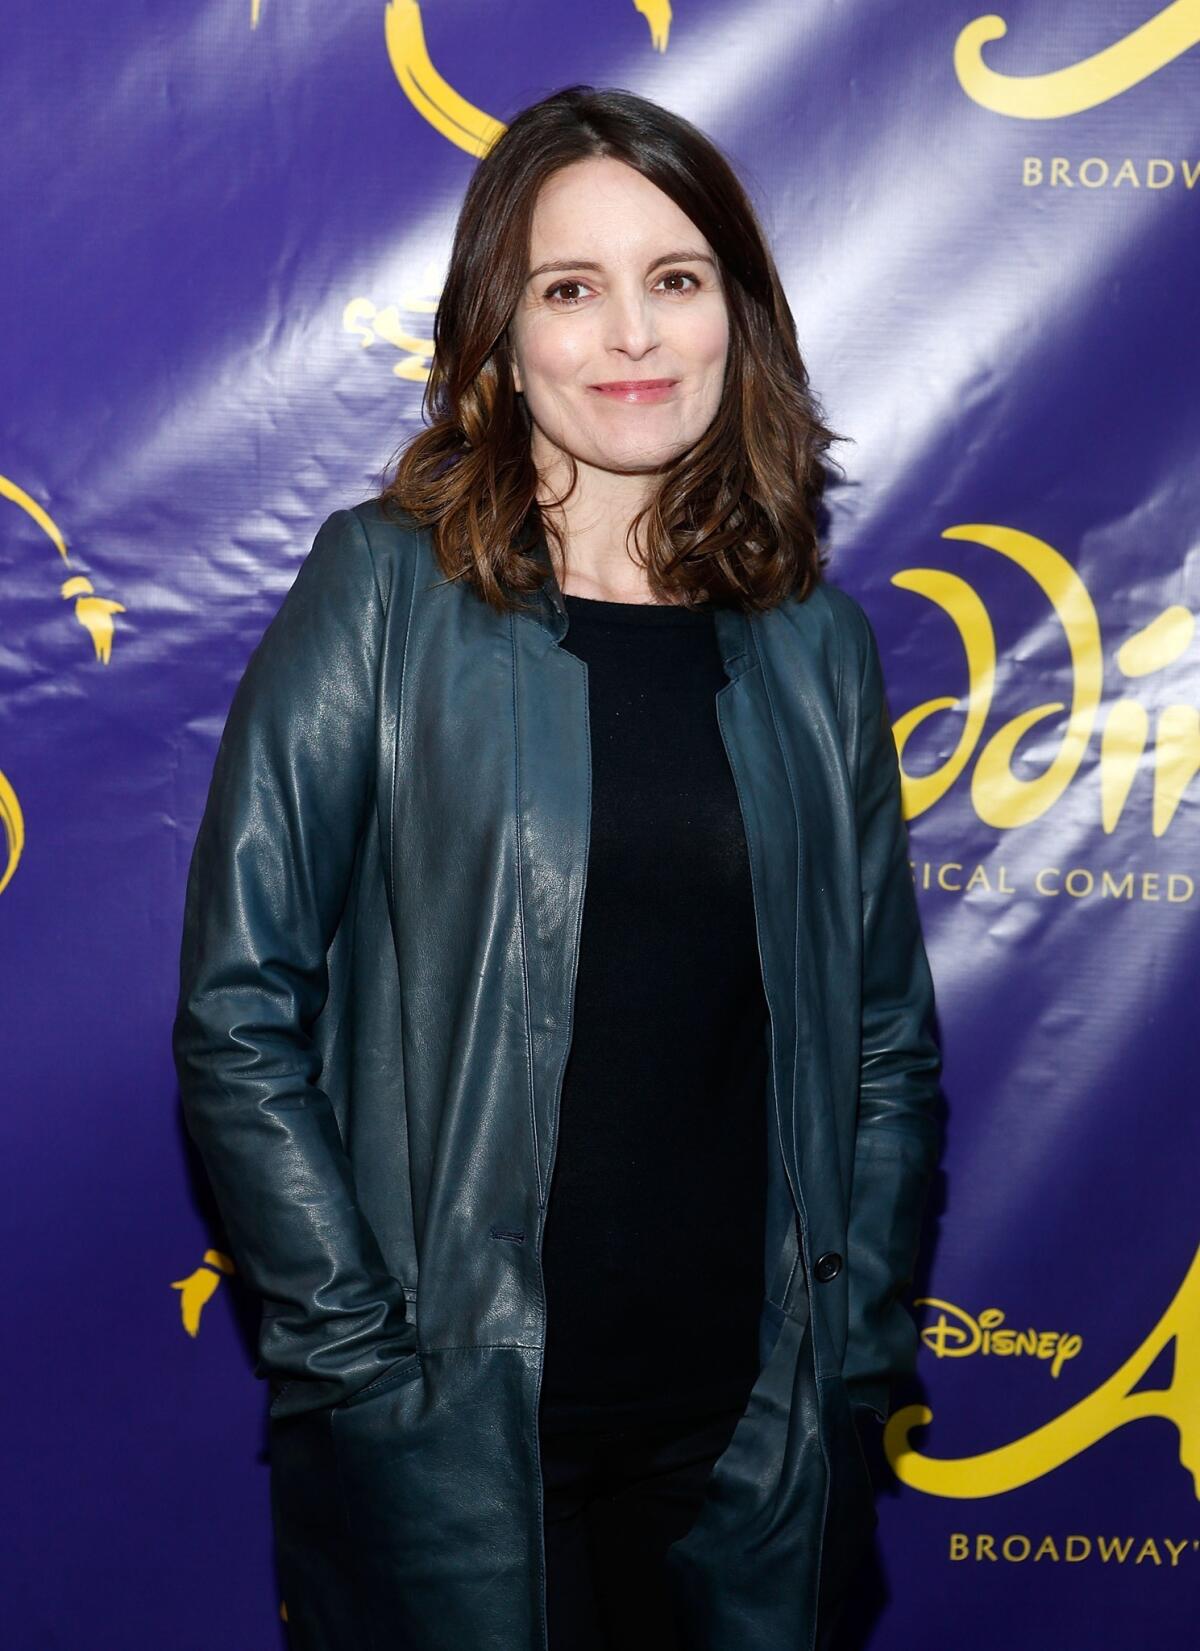 Tina Fey, is a creator/writer on "30 Rock" and wrote "Mean Girls."